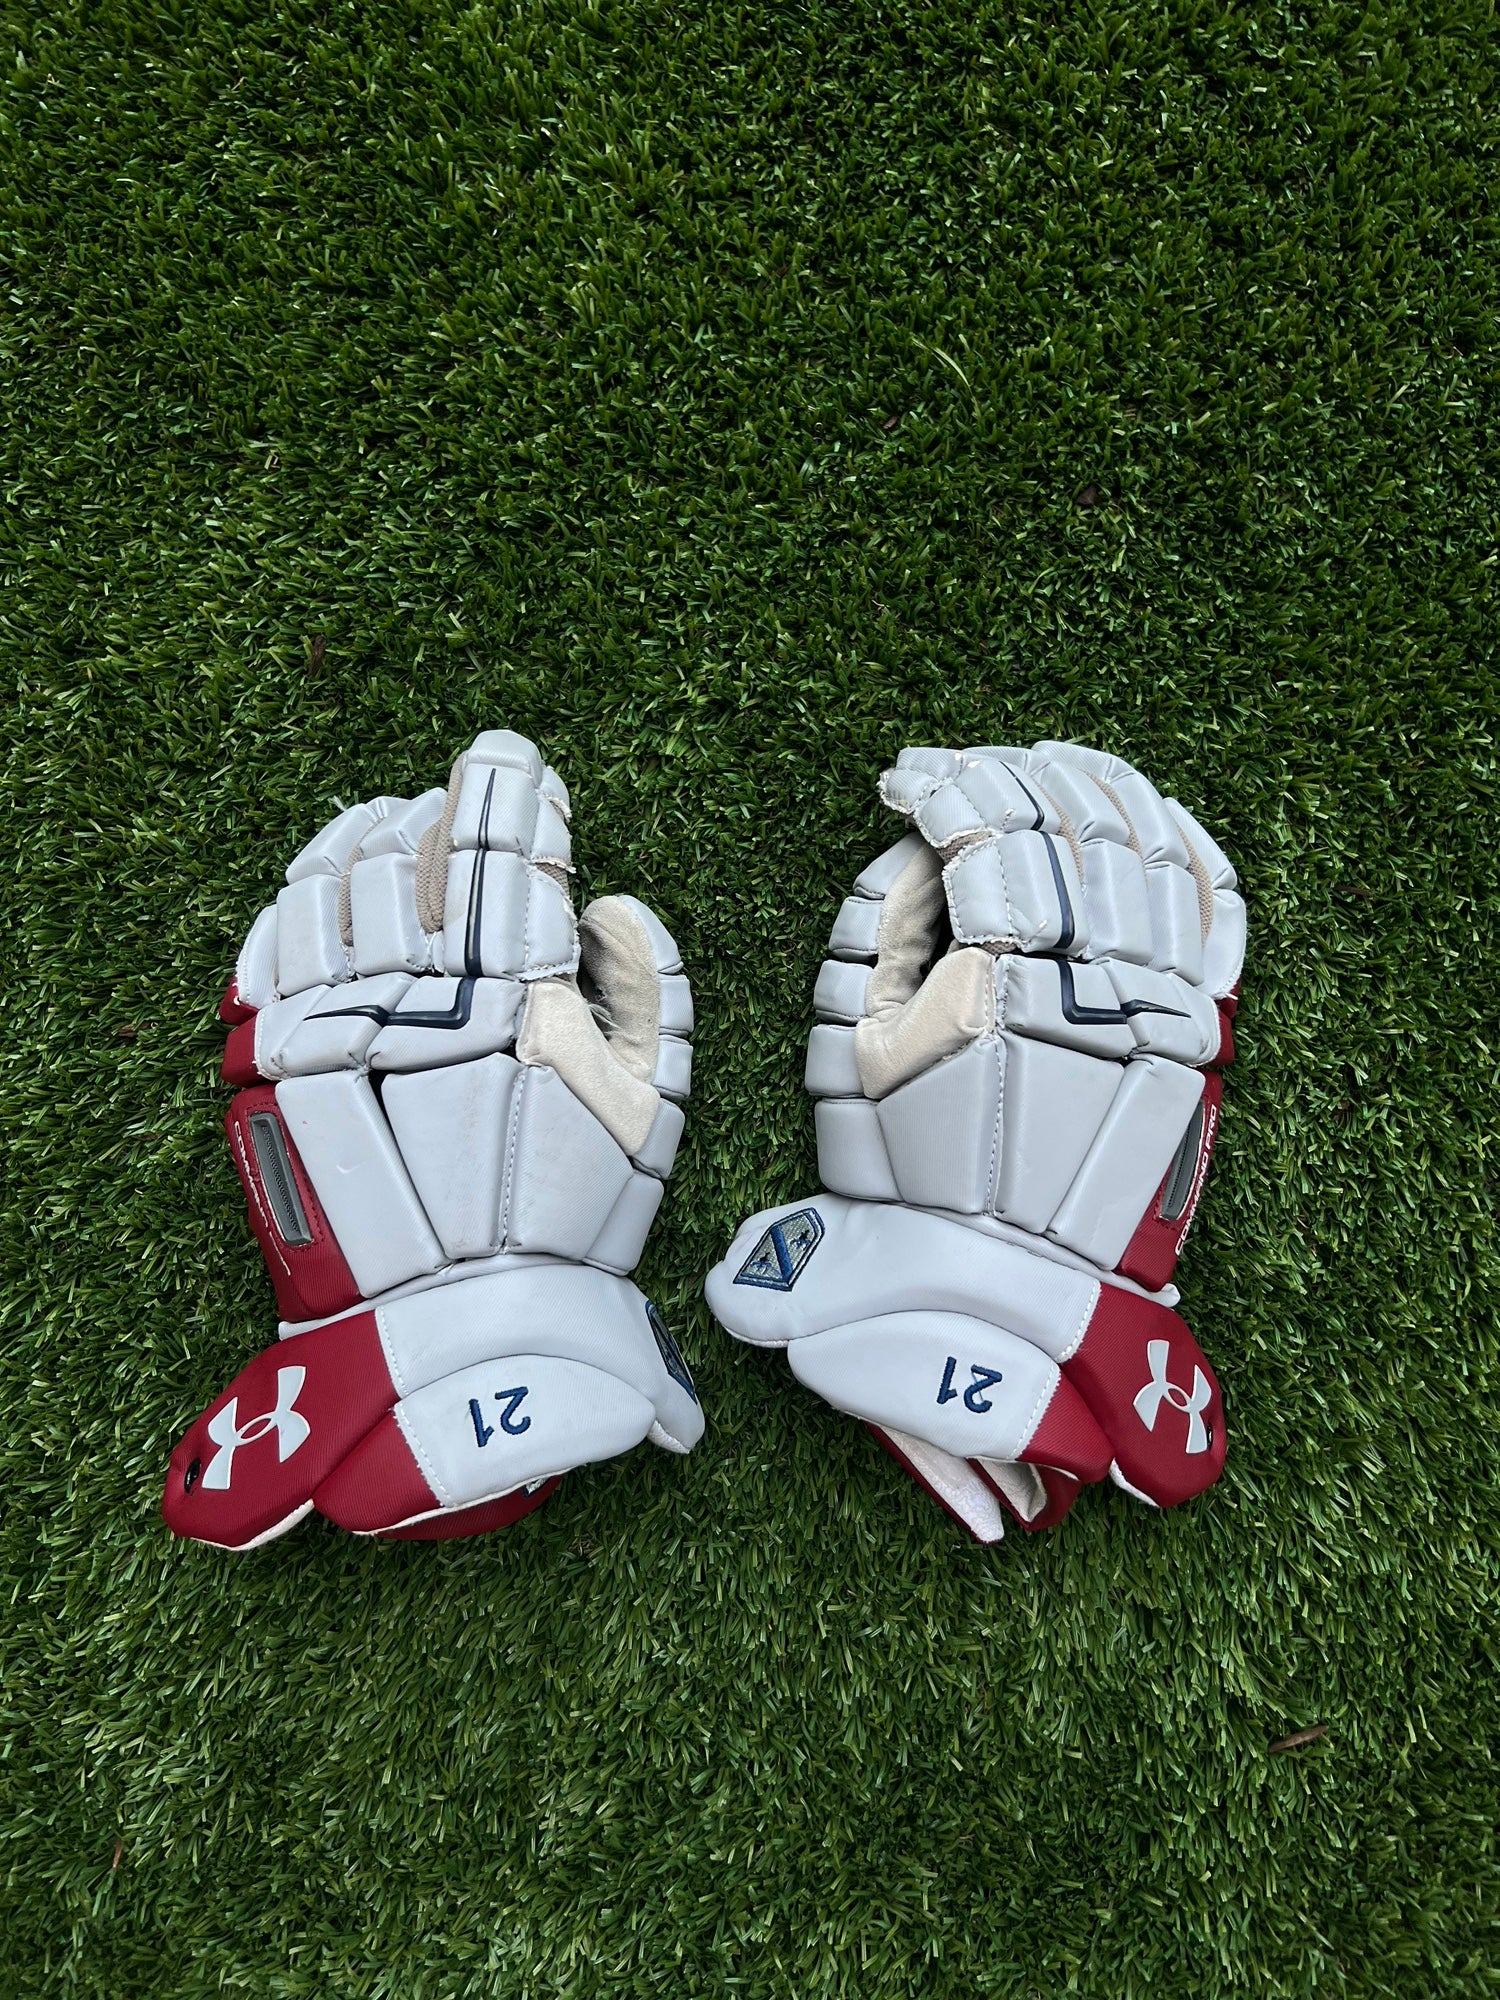 Used Under Armour 13 Taft Command Pro Lacrosse Gloves